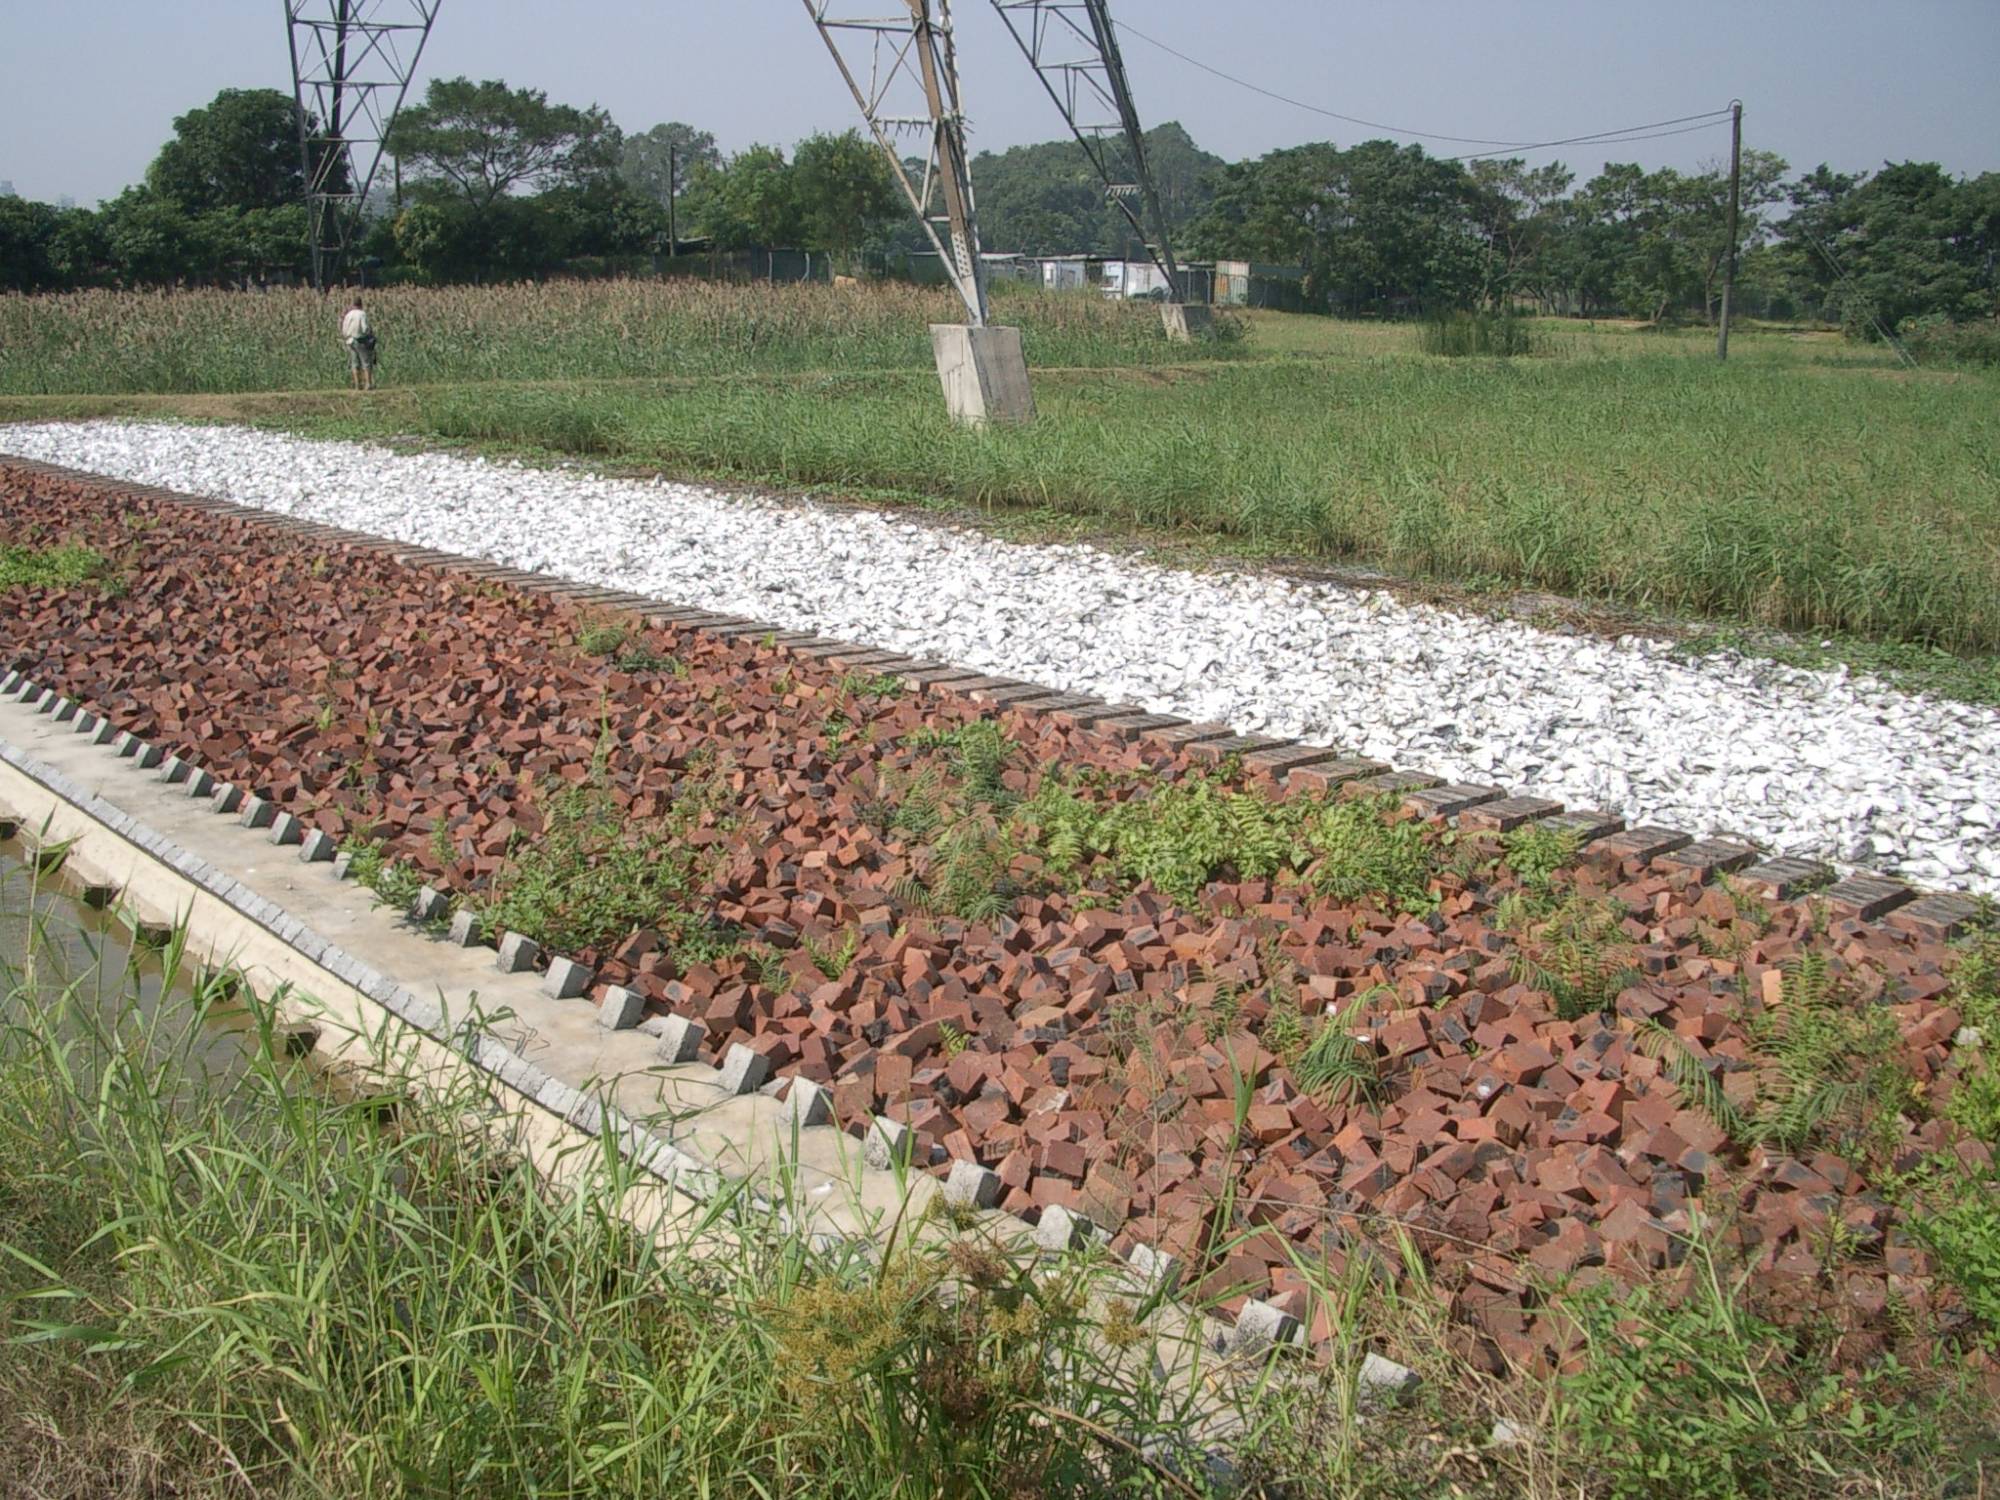 Before flowing into the engineered wetland, the dry weather flow of Yuen Long Bypass Floodway will first pass through the oyster shell pond, crushed brick and reed bed in the wetland for natural filtration and purification.